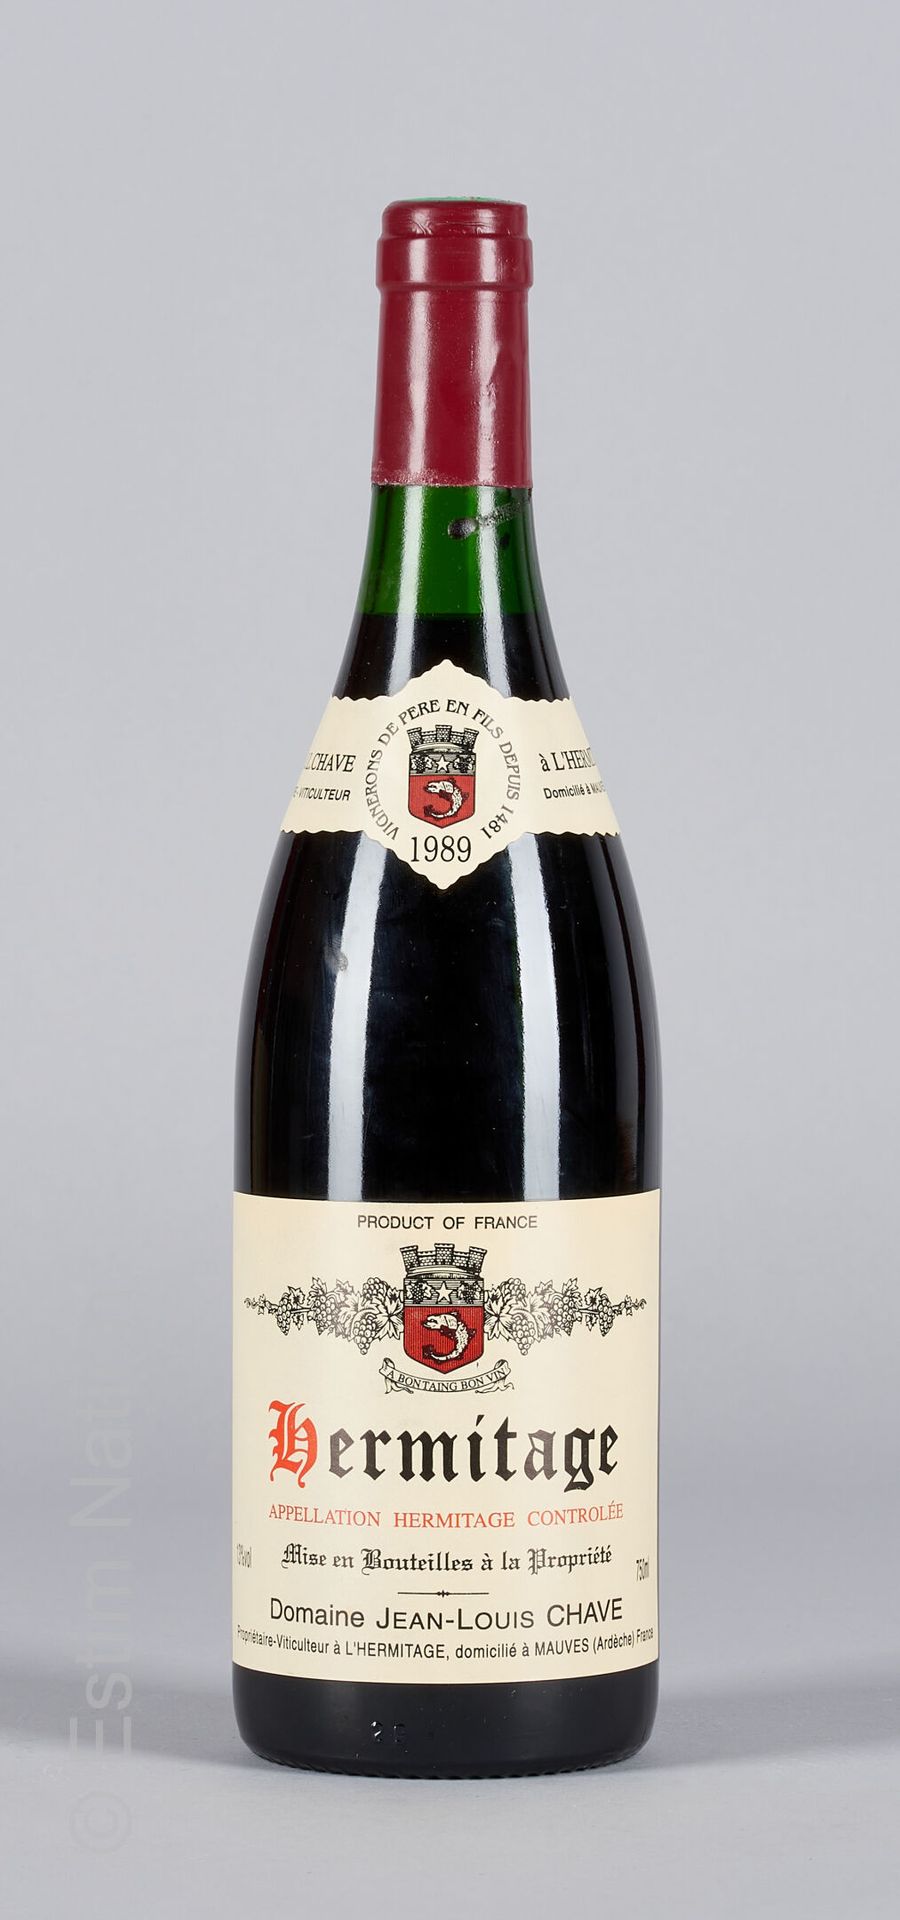 HERMITAGE ROUGE 1 bouteille HERMITAGE 1989 Jean-Louis Chave

(N. Entre 2 et 2,5 &hellip;